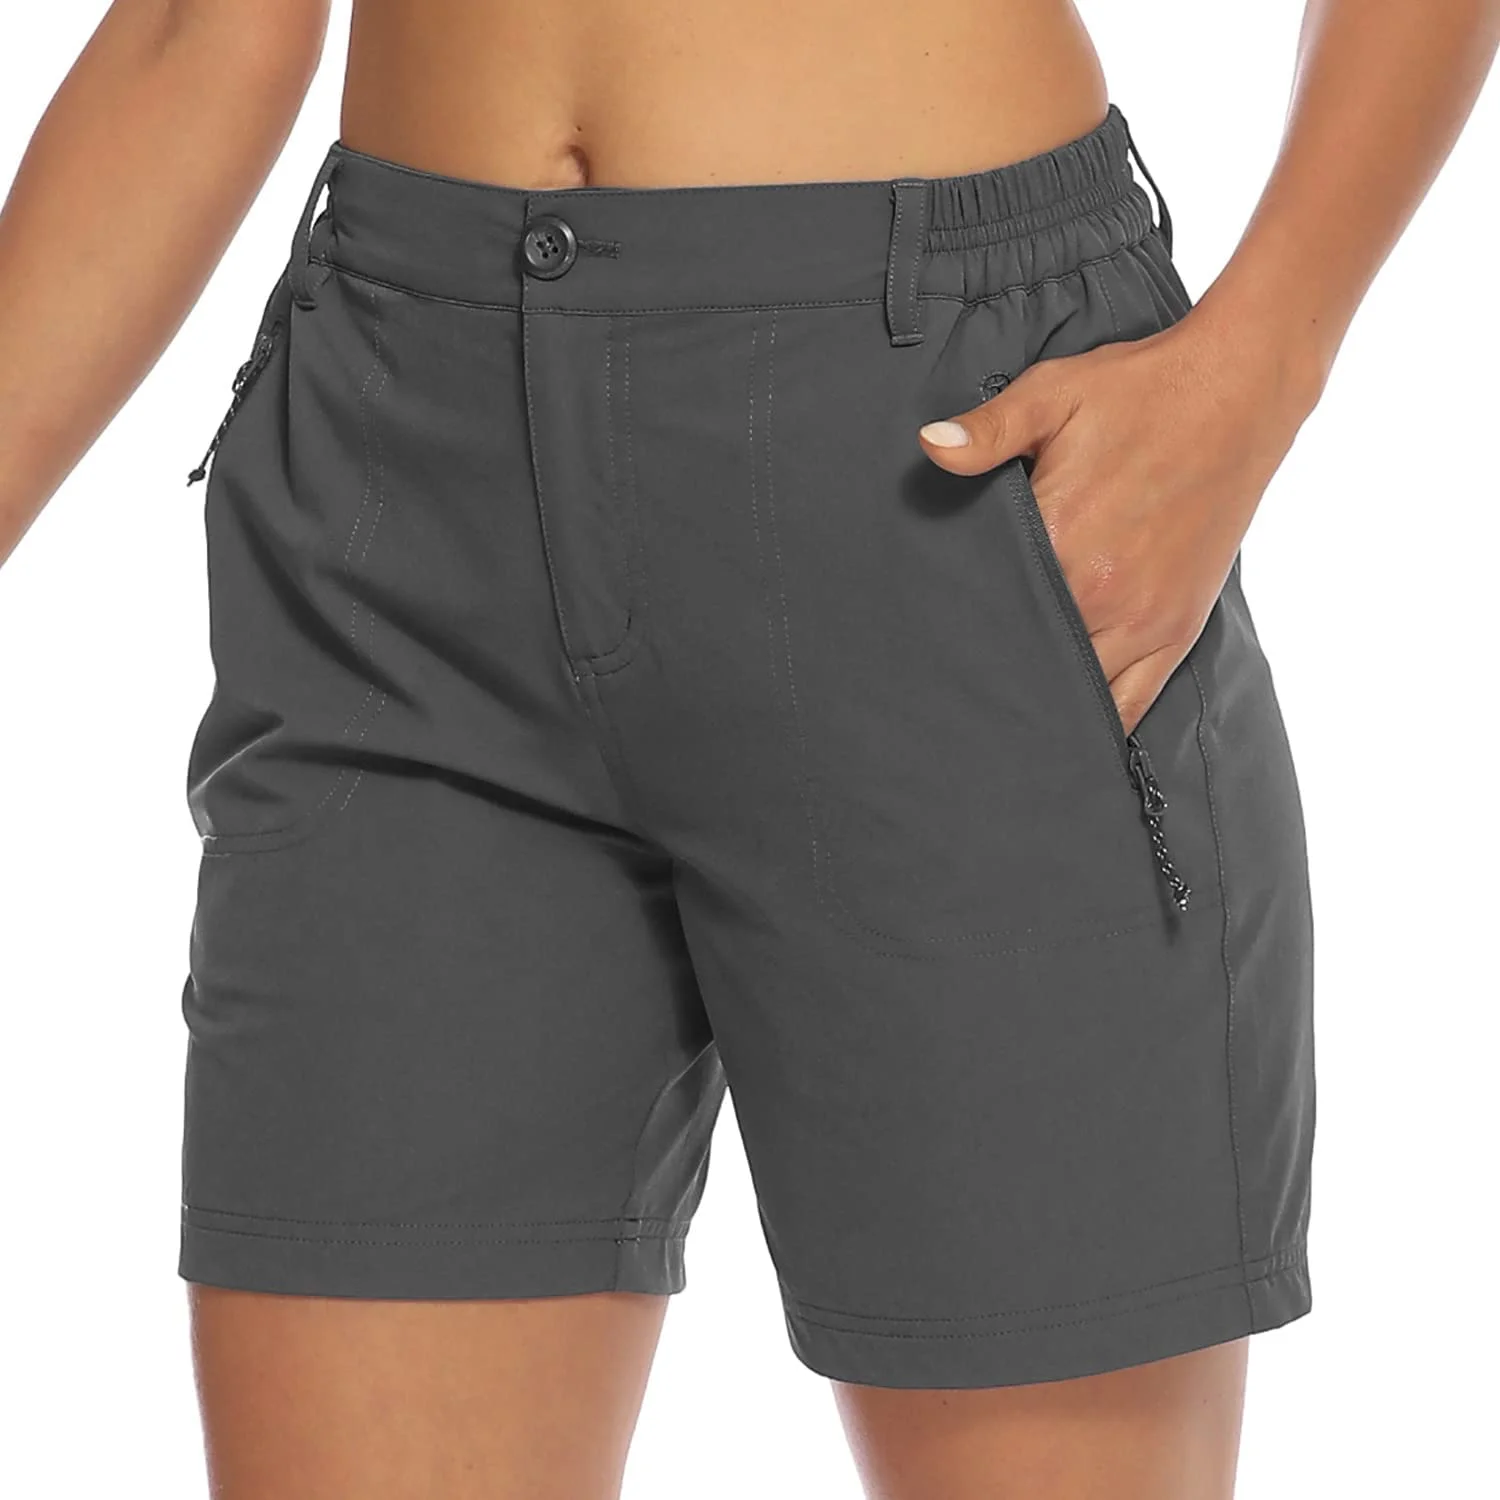 Womens Hiking Cargo Shorts Quick Dry With Pockets Lightweight Running Golf Outdoor Active Summer Shorts